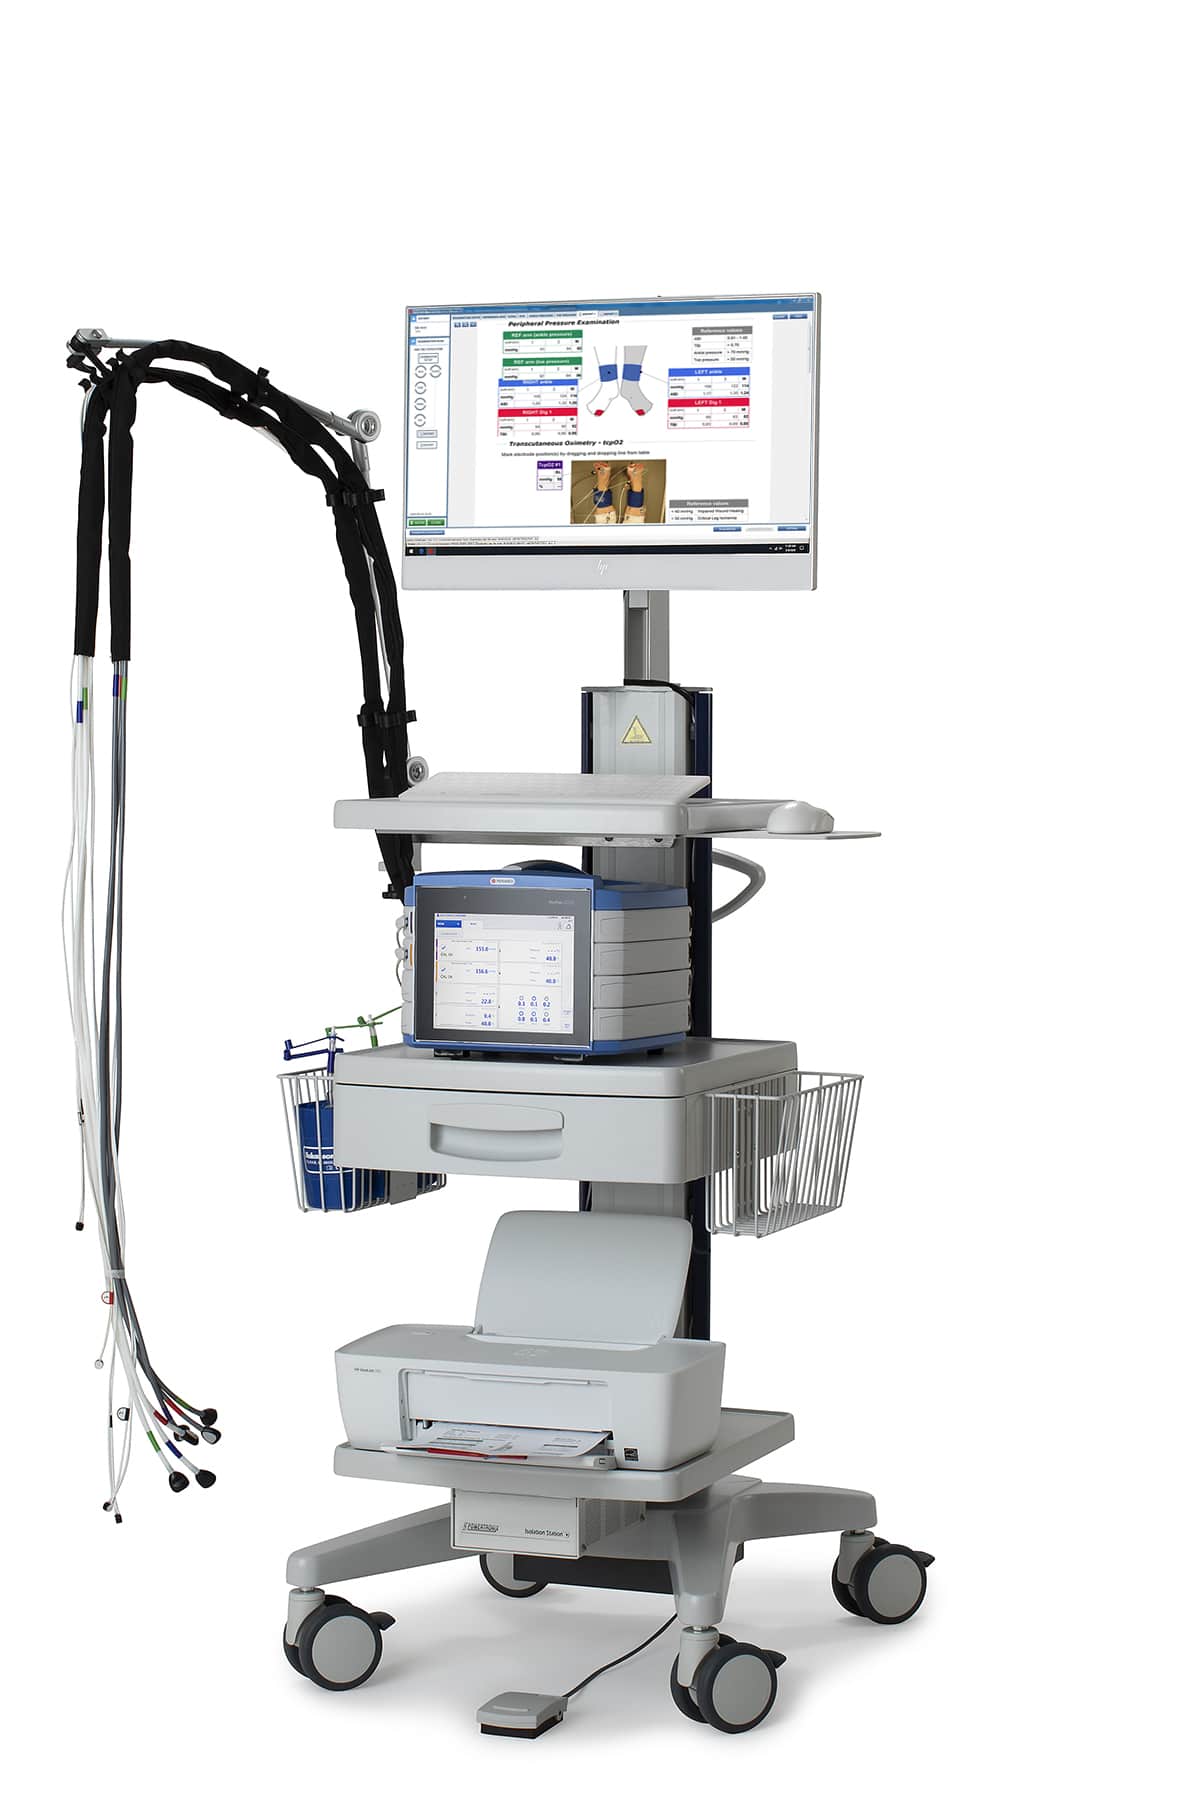 PeriFlux 6000 Combined System - Sindrome Compartimentale Cronica